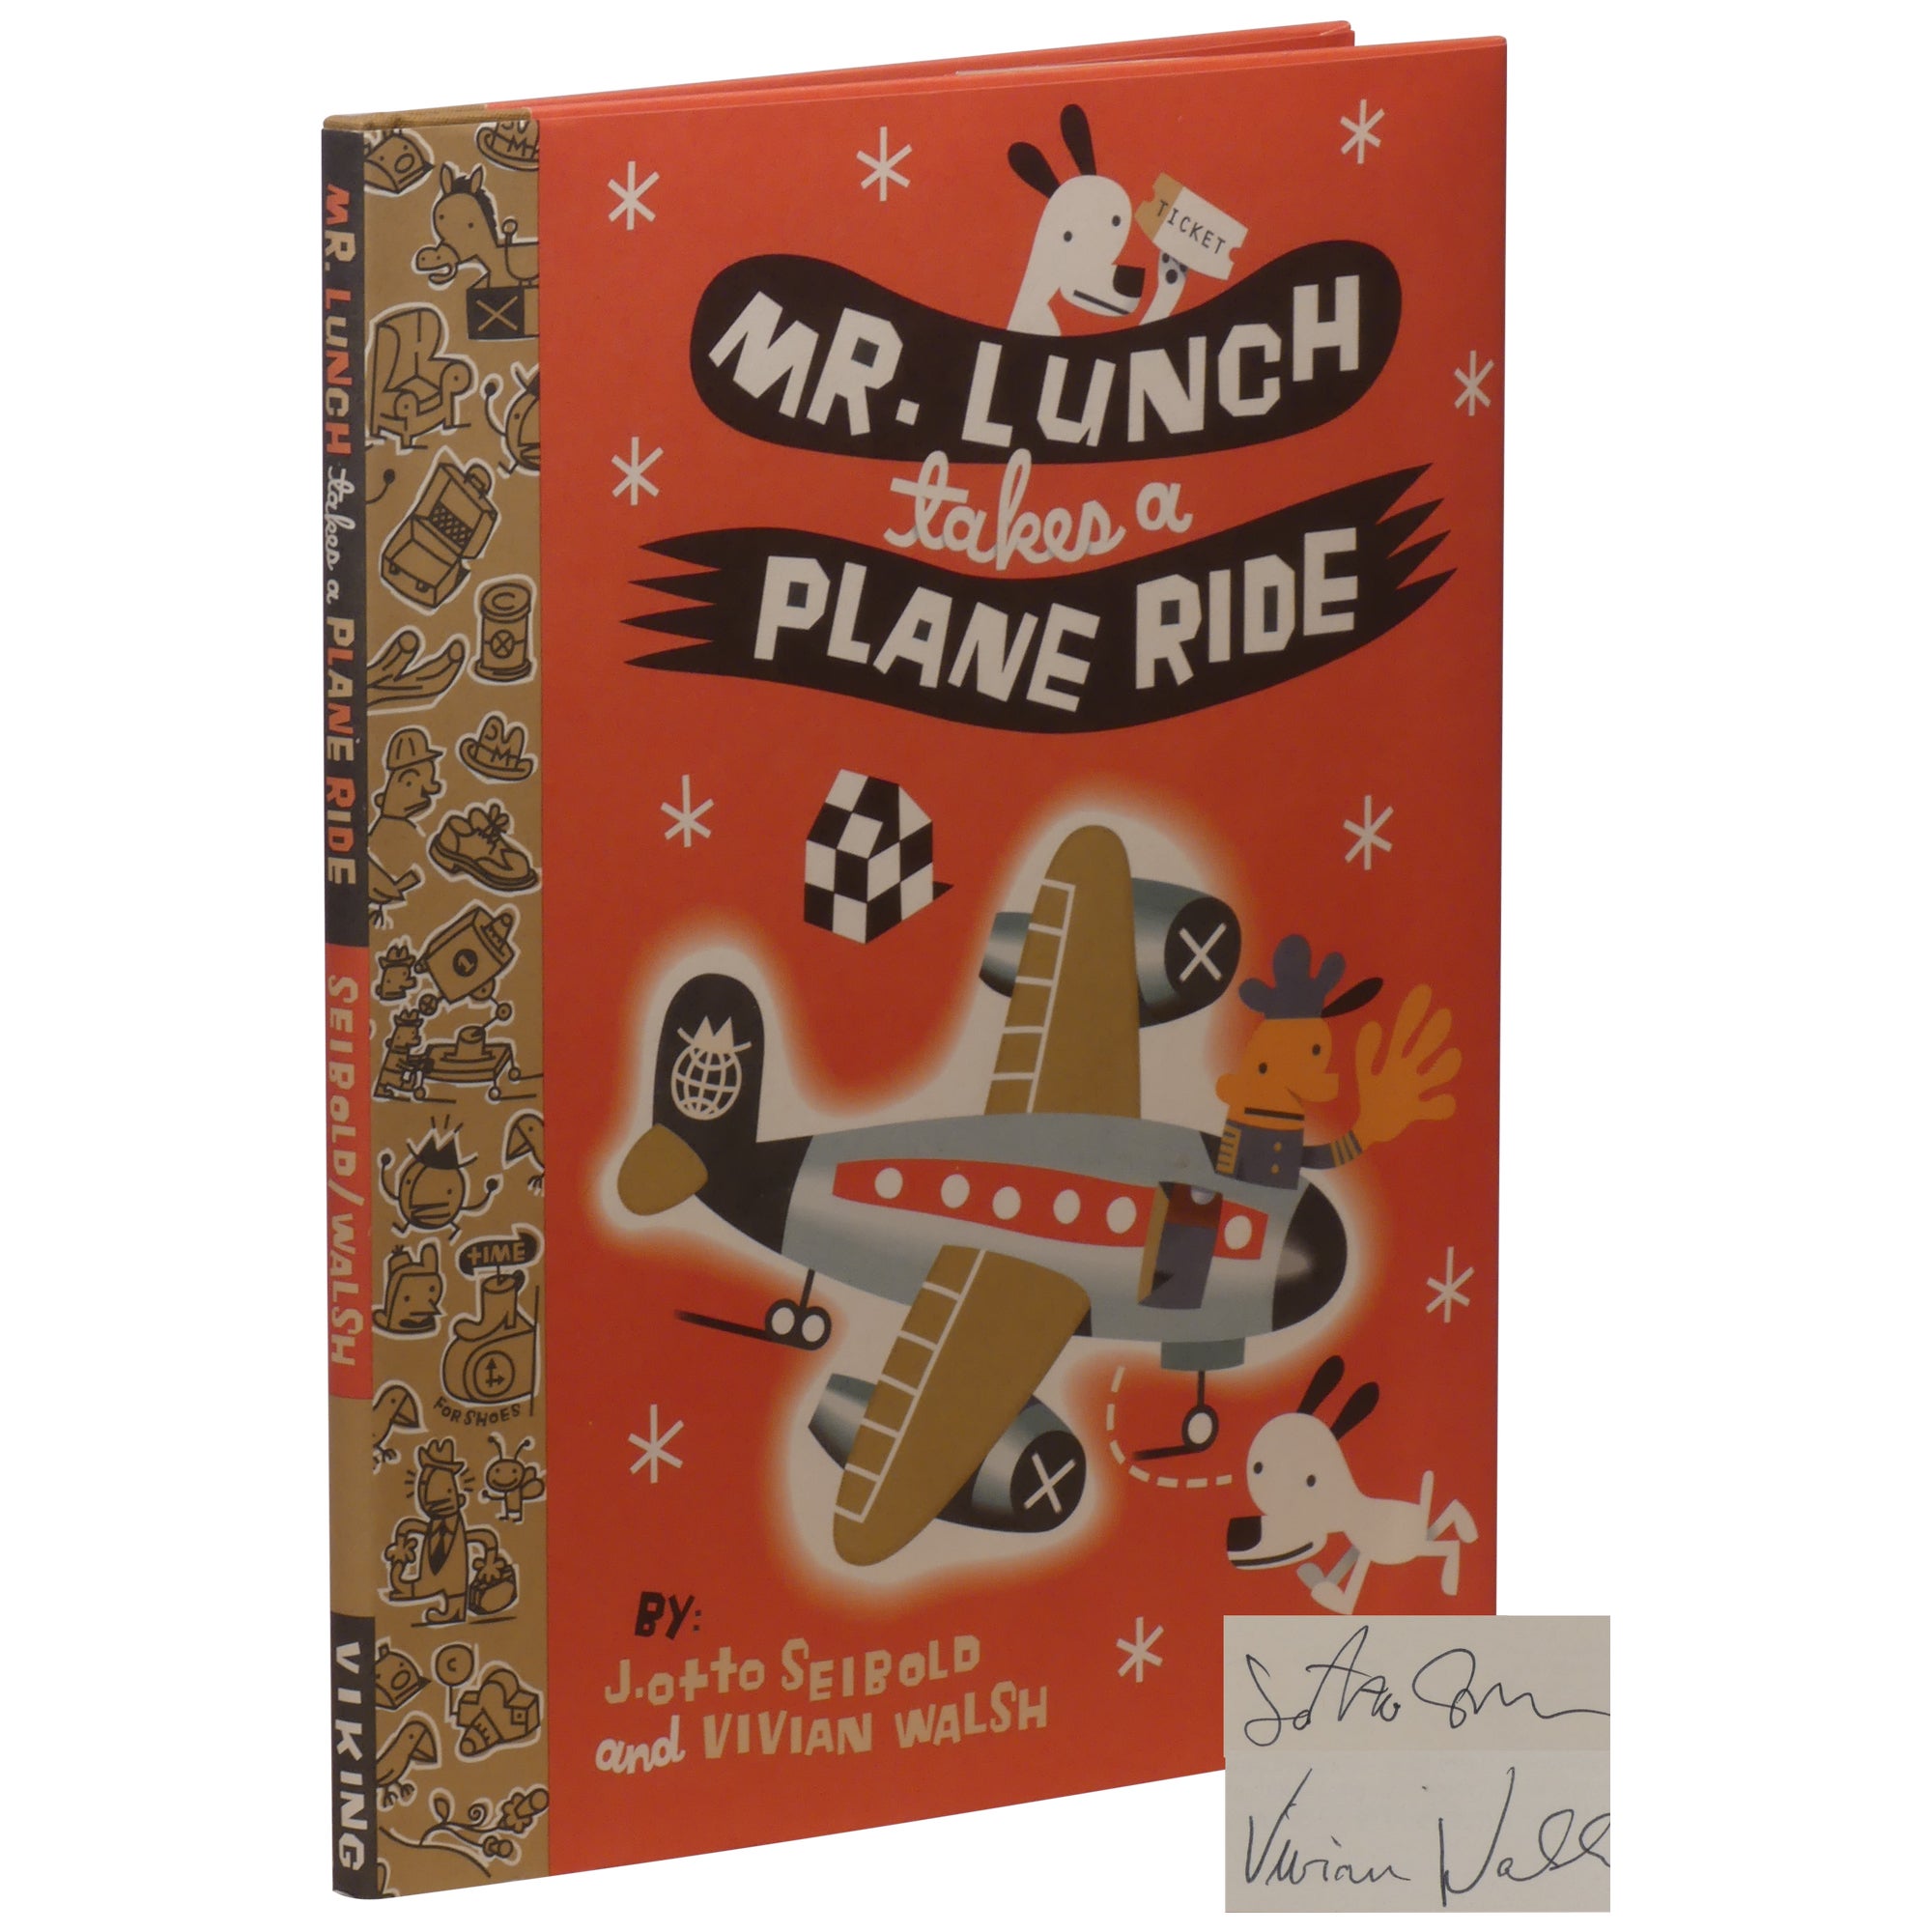 Mr. Lunch Takes a Plane Ride by J. Otto Seibold